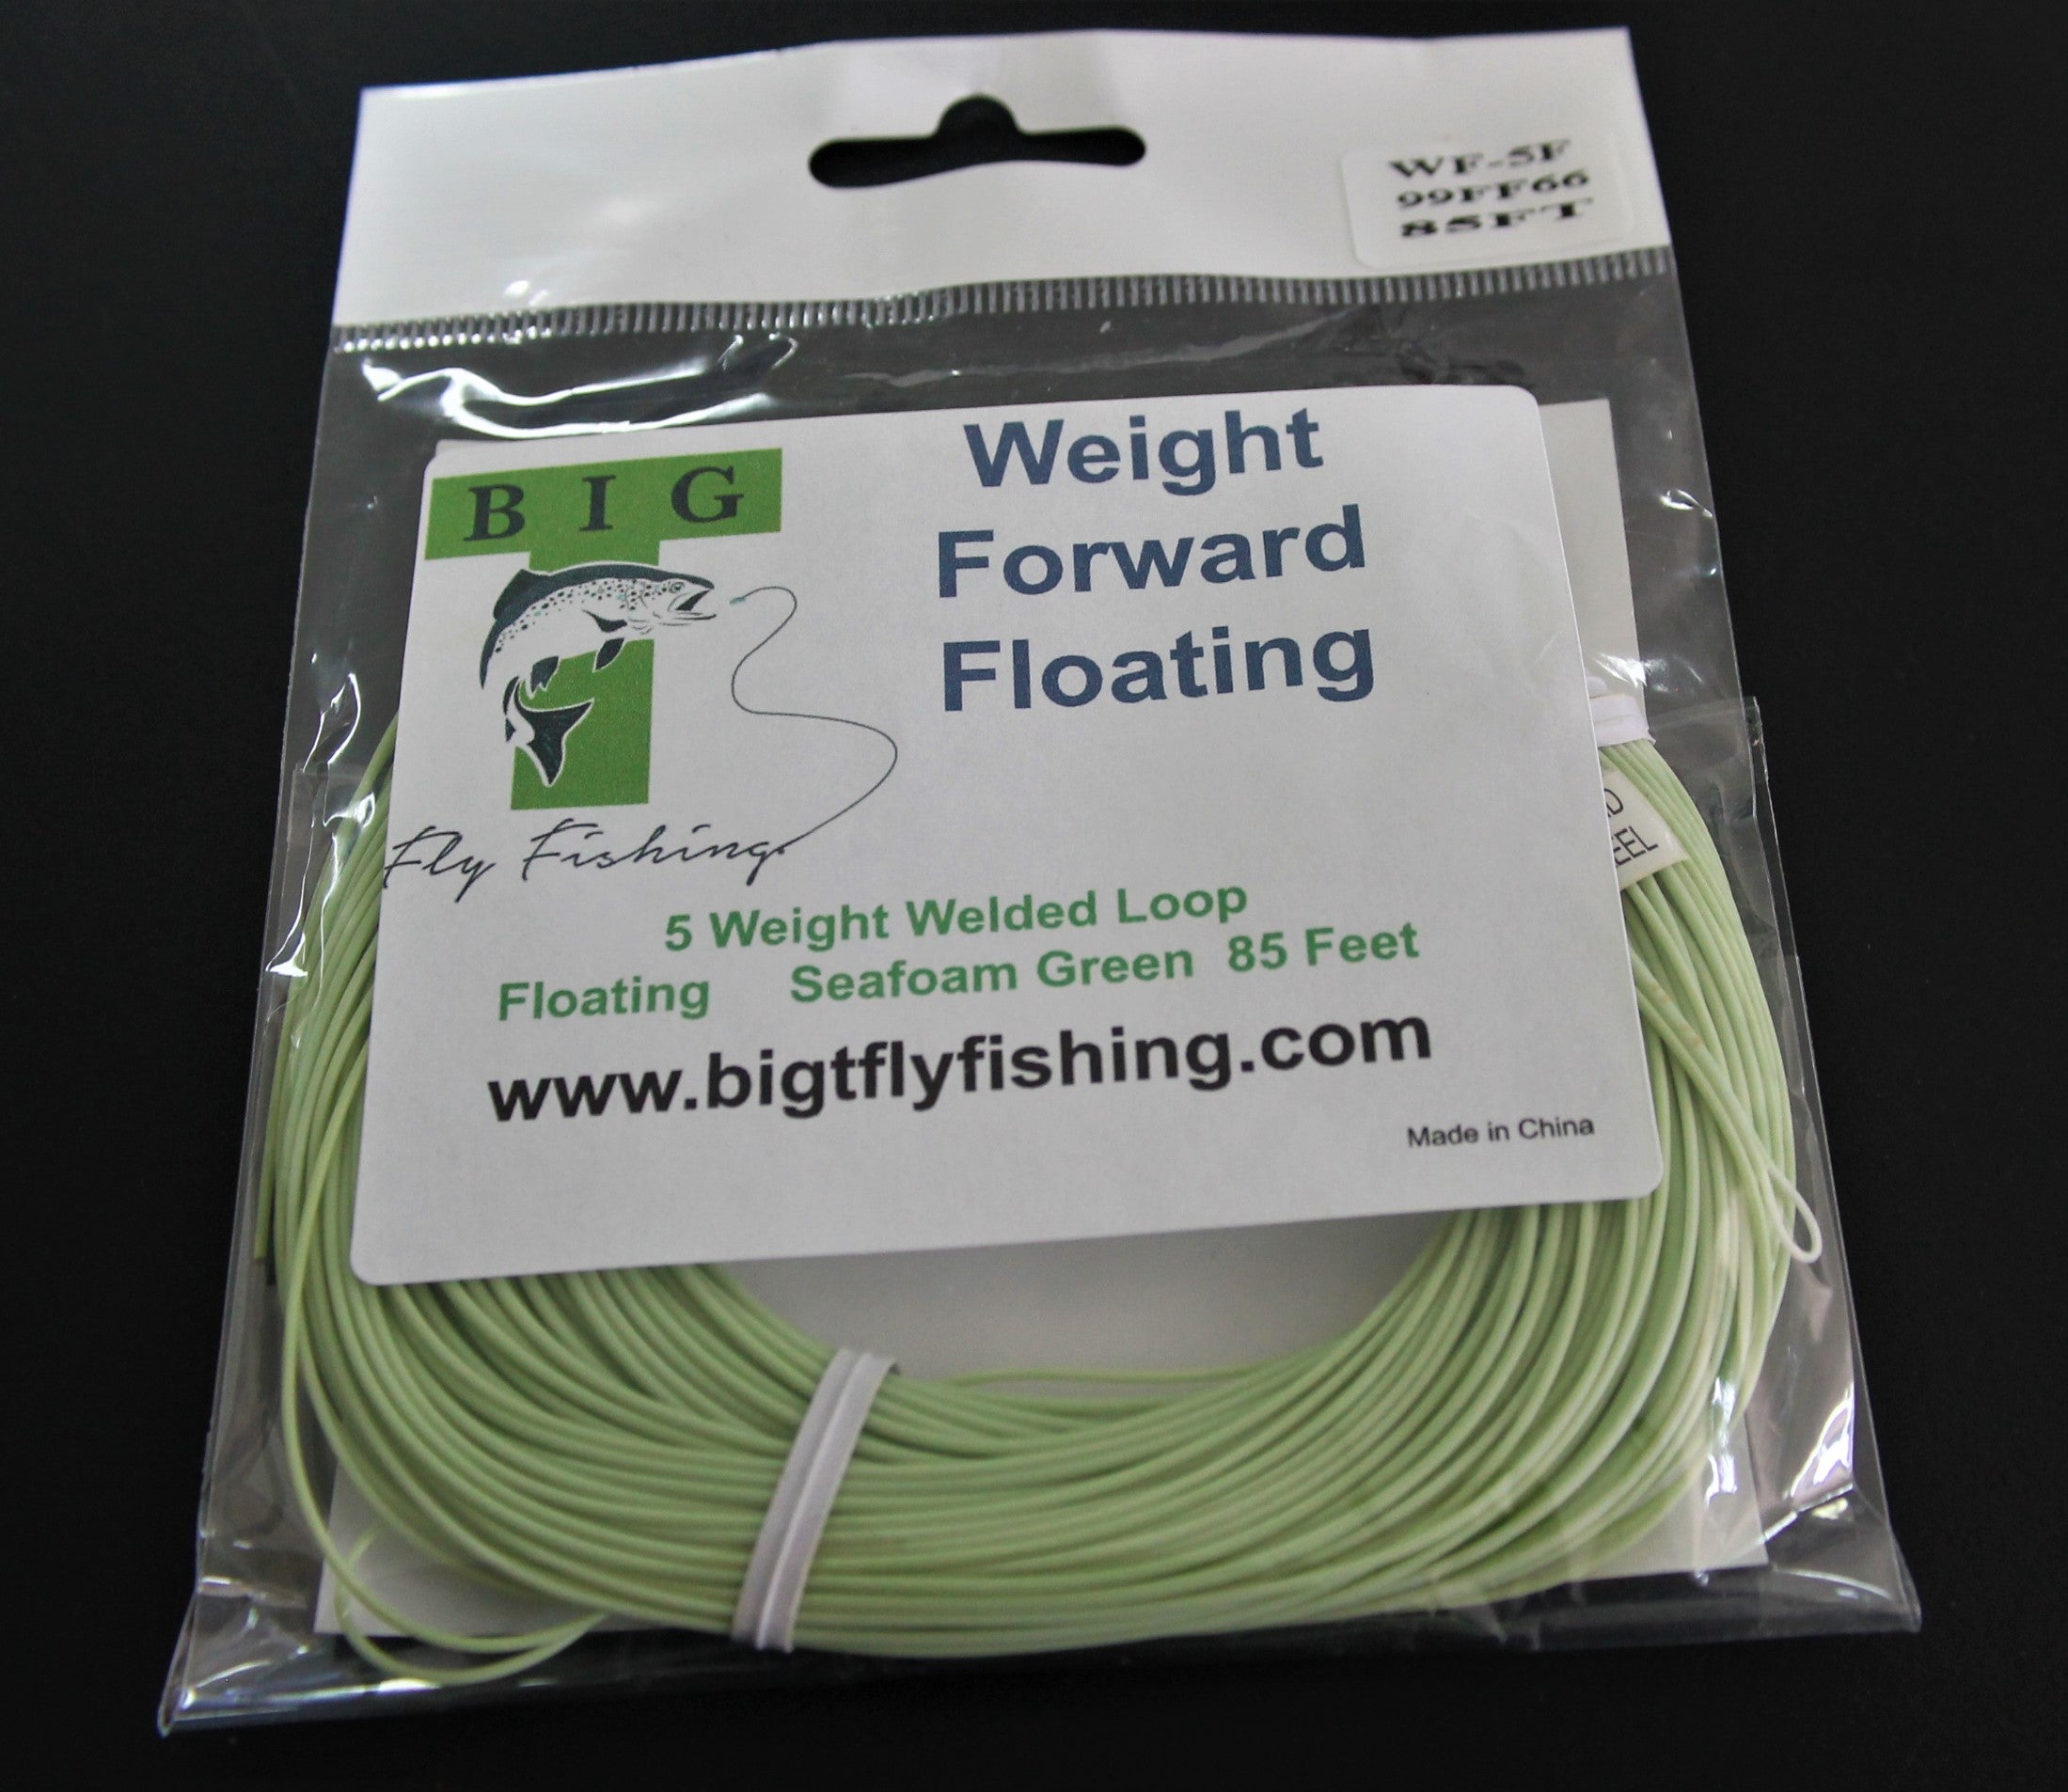 Bright Yellow 100' LN517 FLY LINE Weight Forward Floating 4WT Loops at each end 